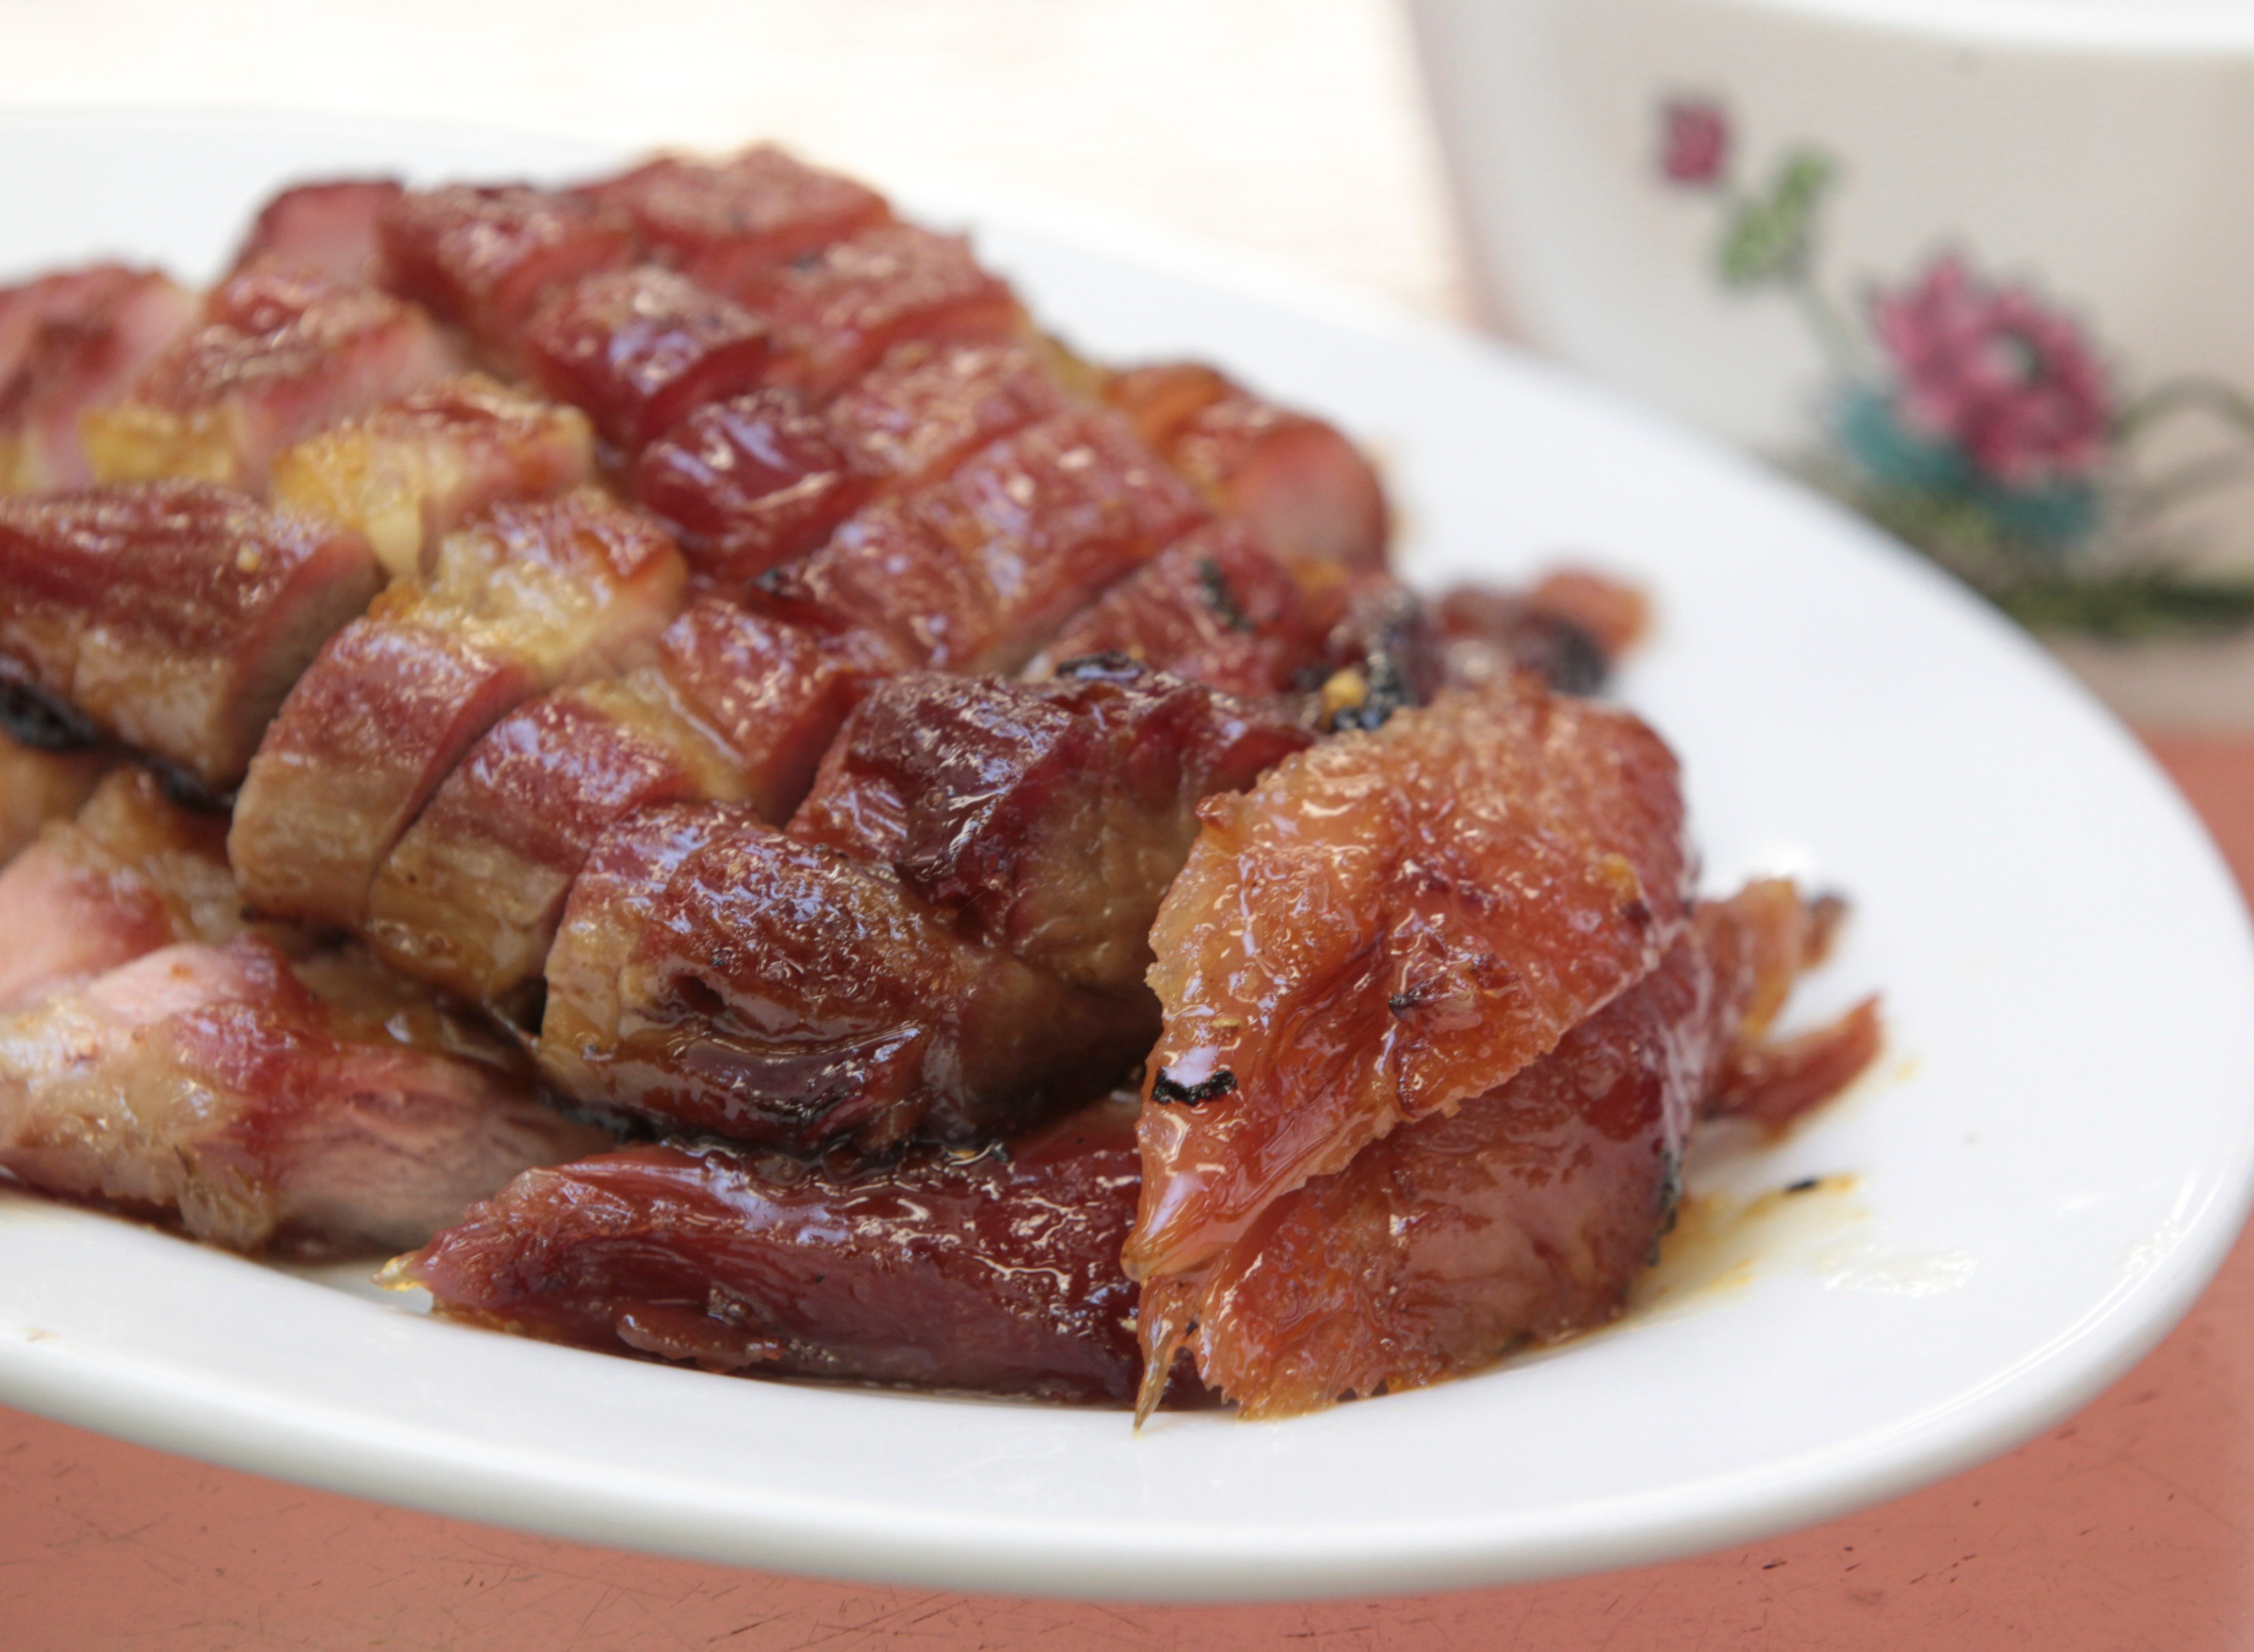 Crystal Jade in Singapore has been feeling the heat for a promotional campaign for char siu (above) that employs a Cantonese insult often directed at children by frustrated parents. Photo: SCMP